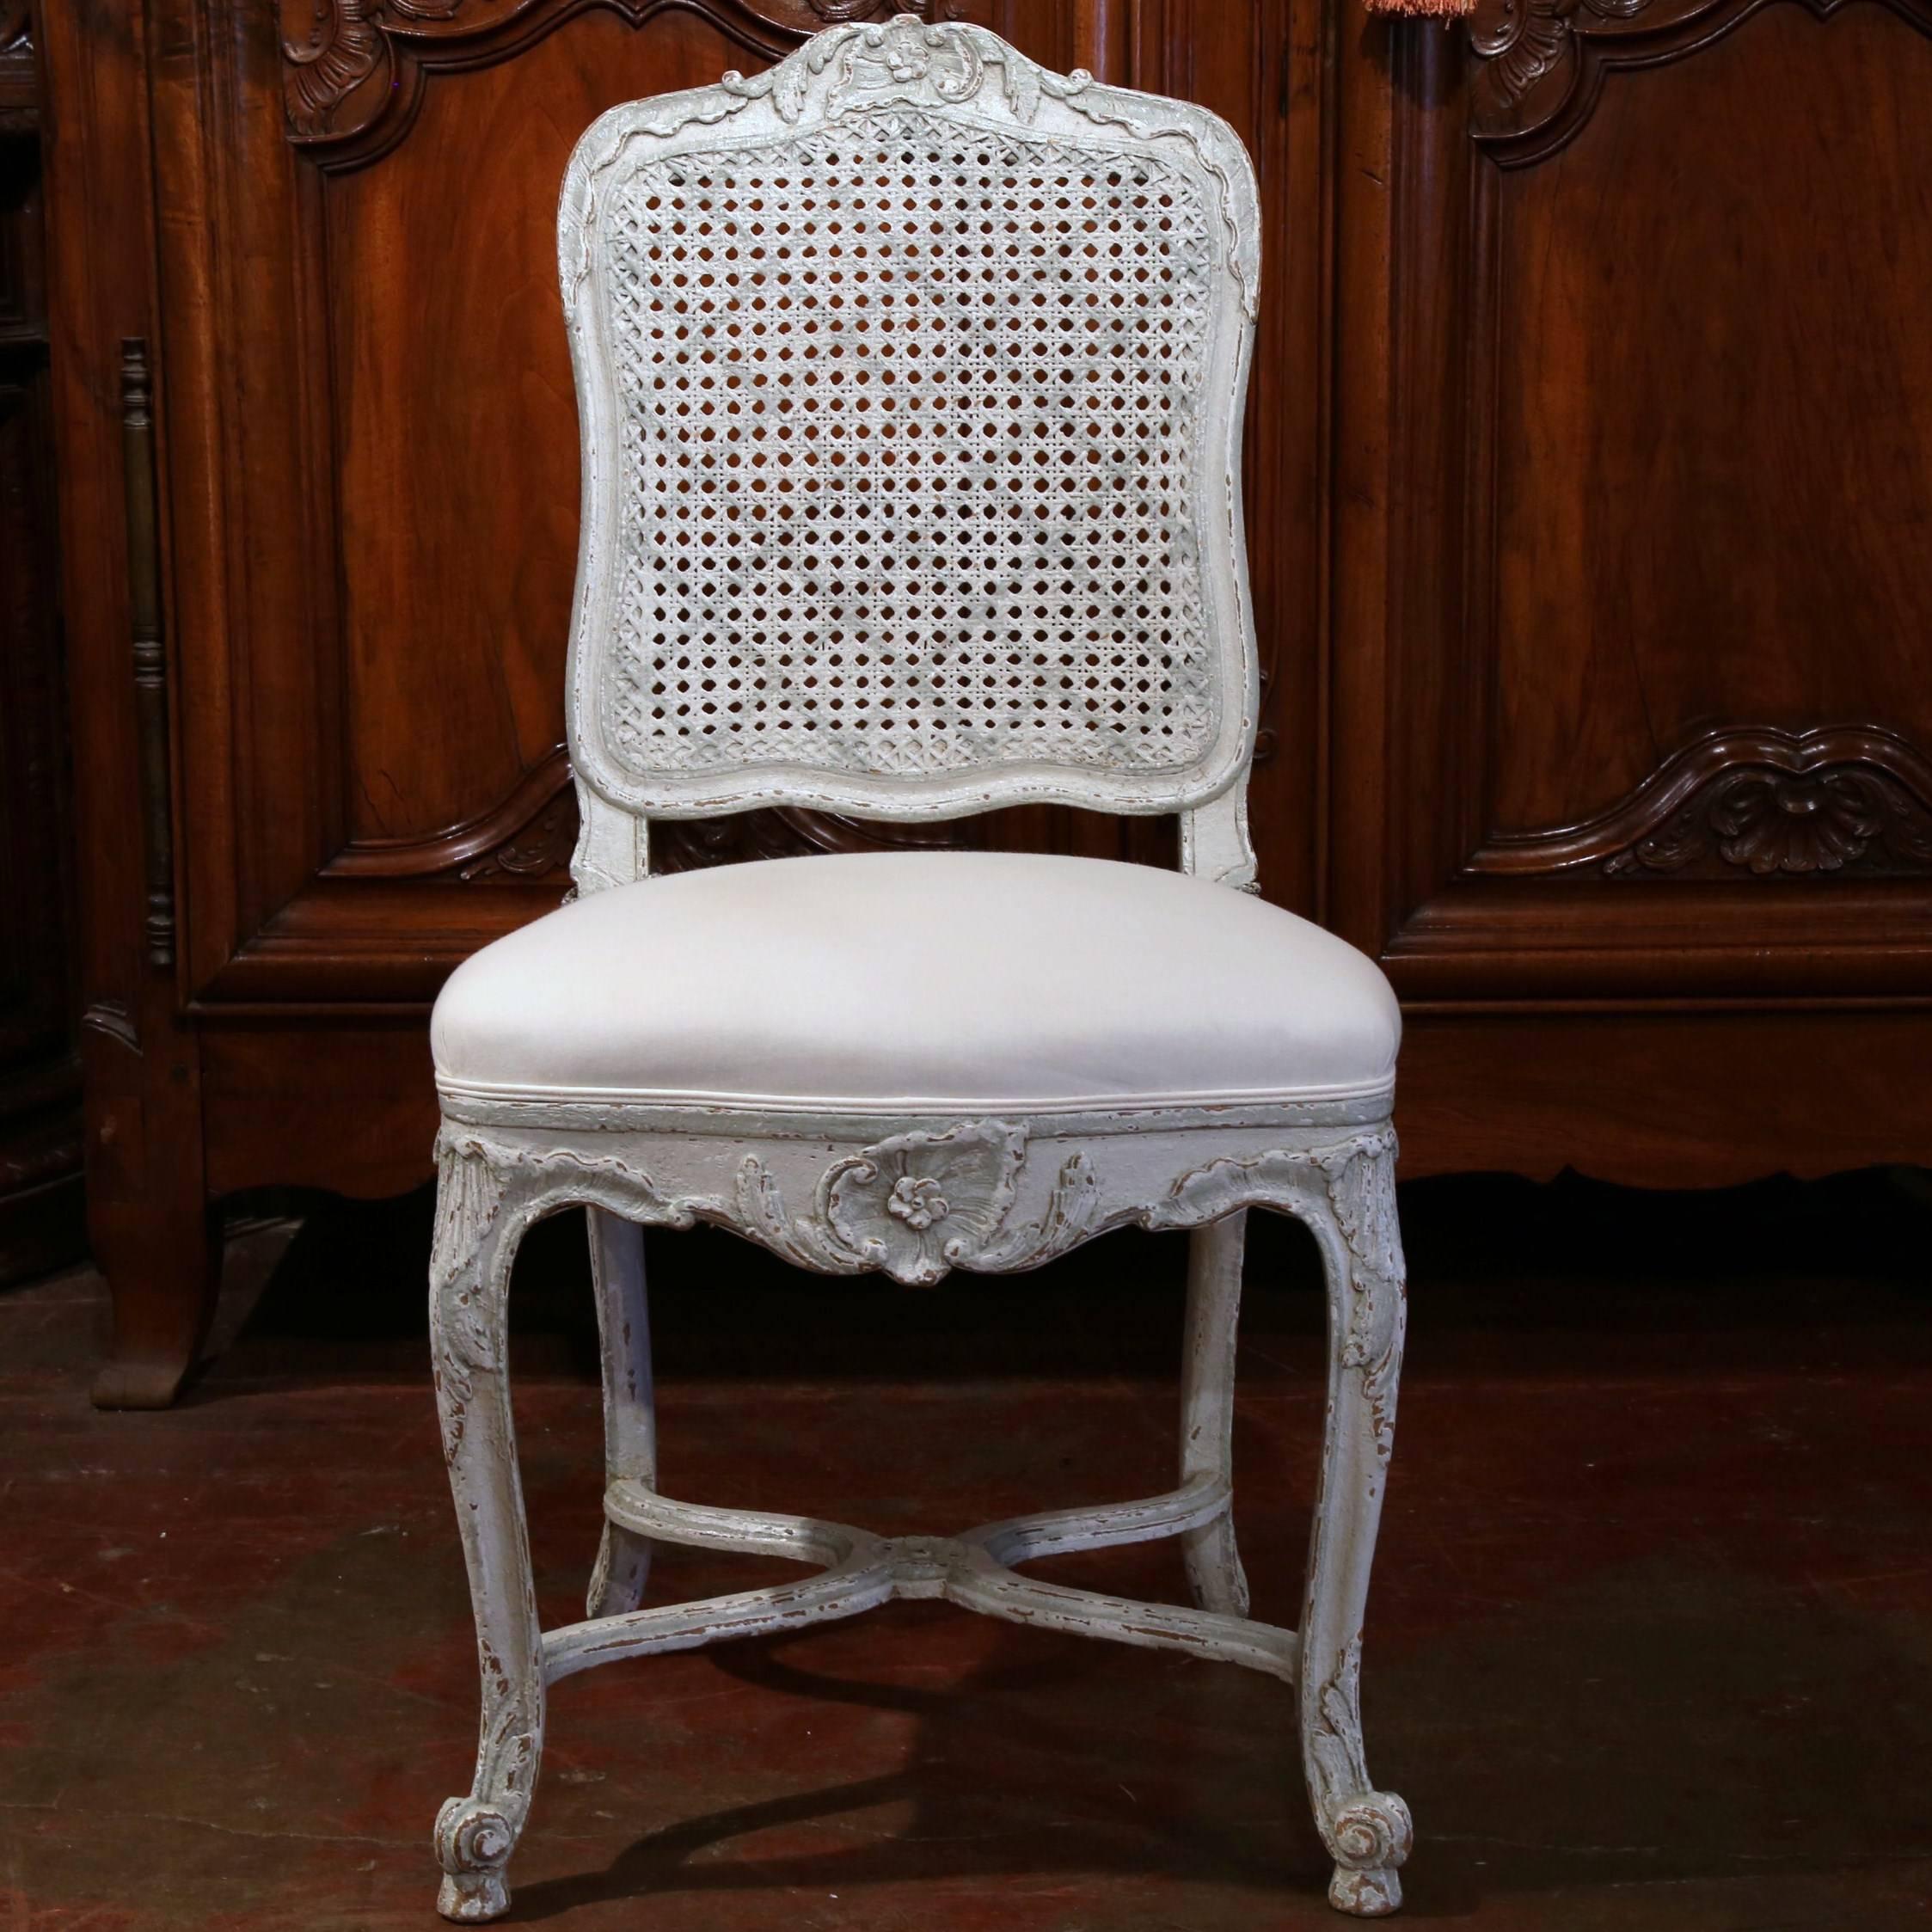 Fine pair of antique Louis XV side chairs from France, circa 1880. Covered with white muslin, these desk or bedroom chairs have beautiful carving, cabriole legs, stretcher and grey painted cane back. Excellent condition. Can be sold separately.